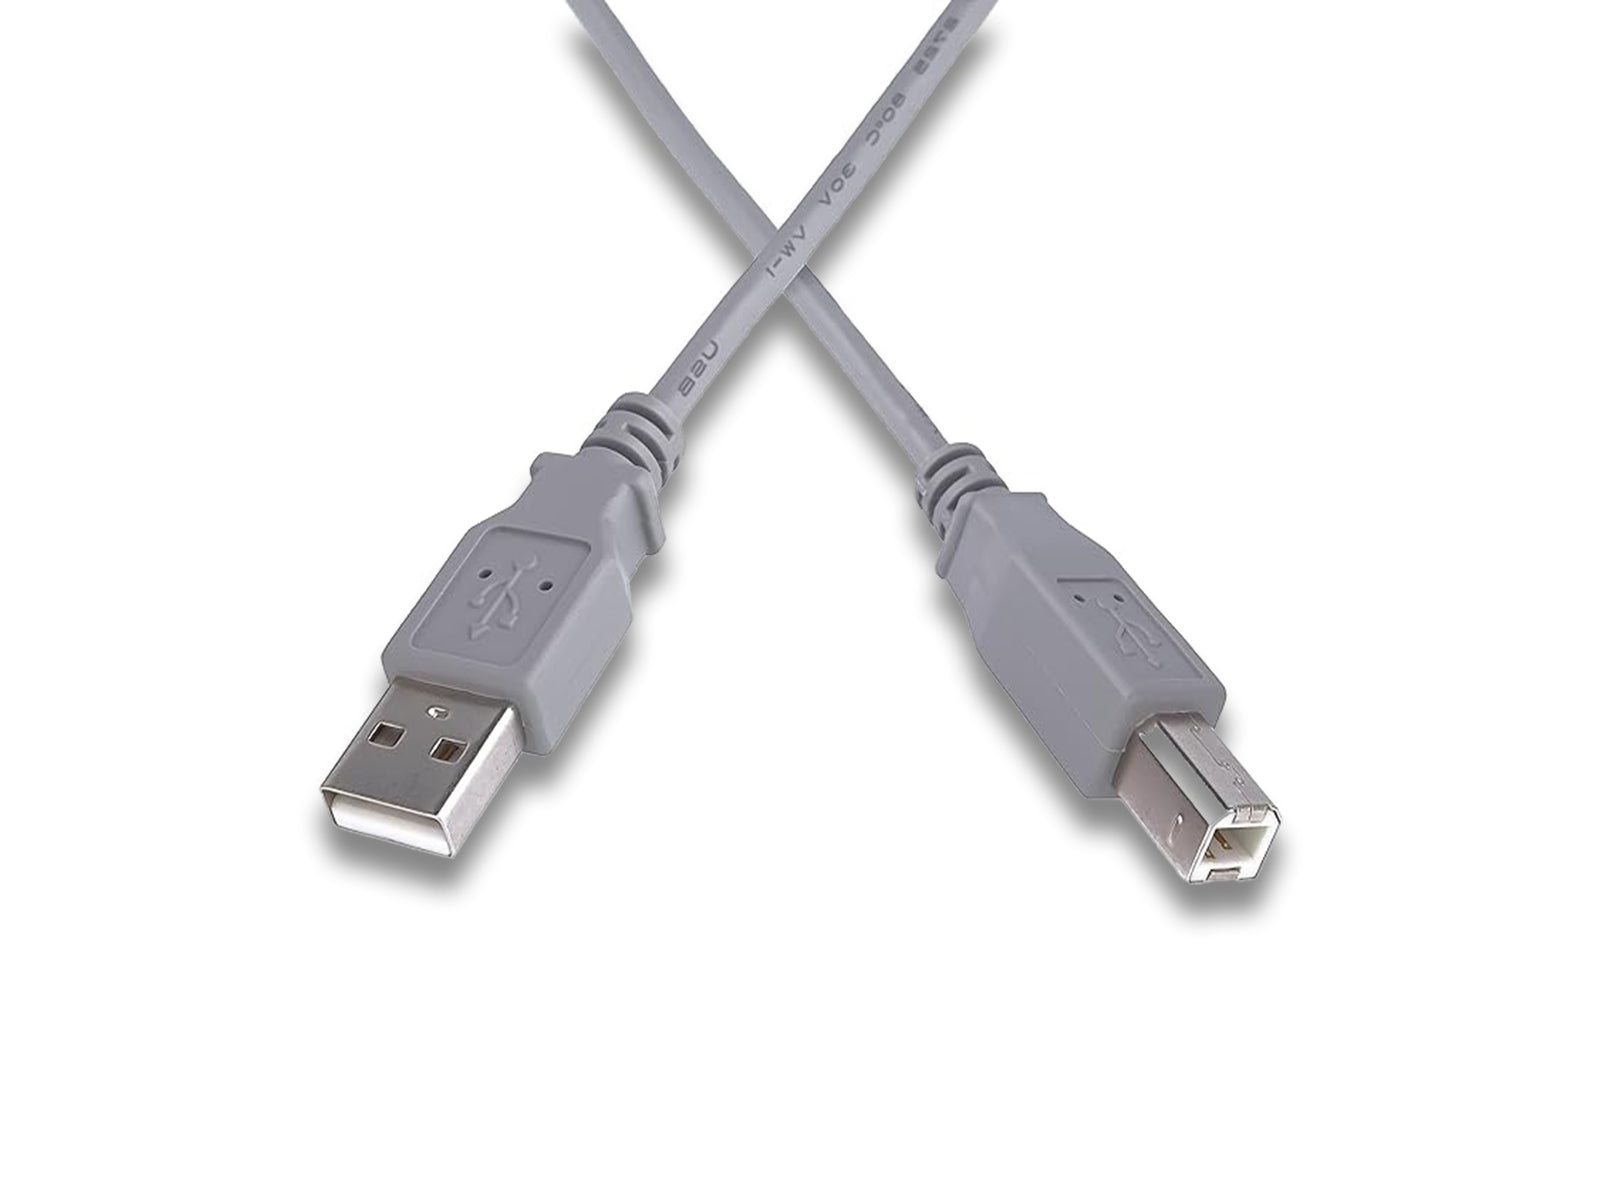 Image shows connectors in X formation on white background